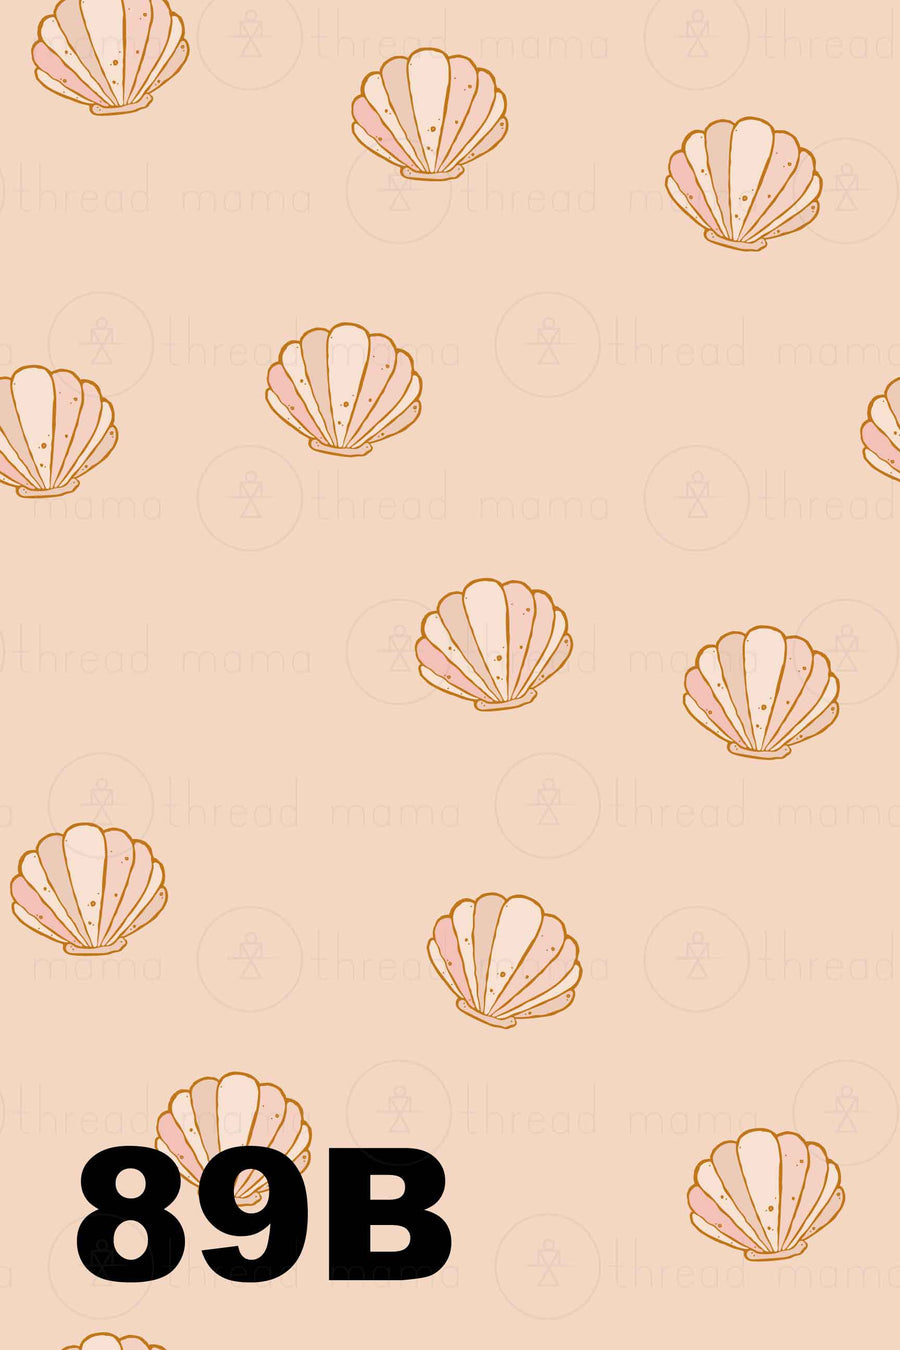 Background Pattern #89 Collection (Printable Poster)